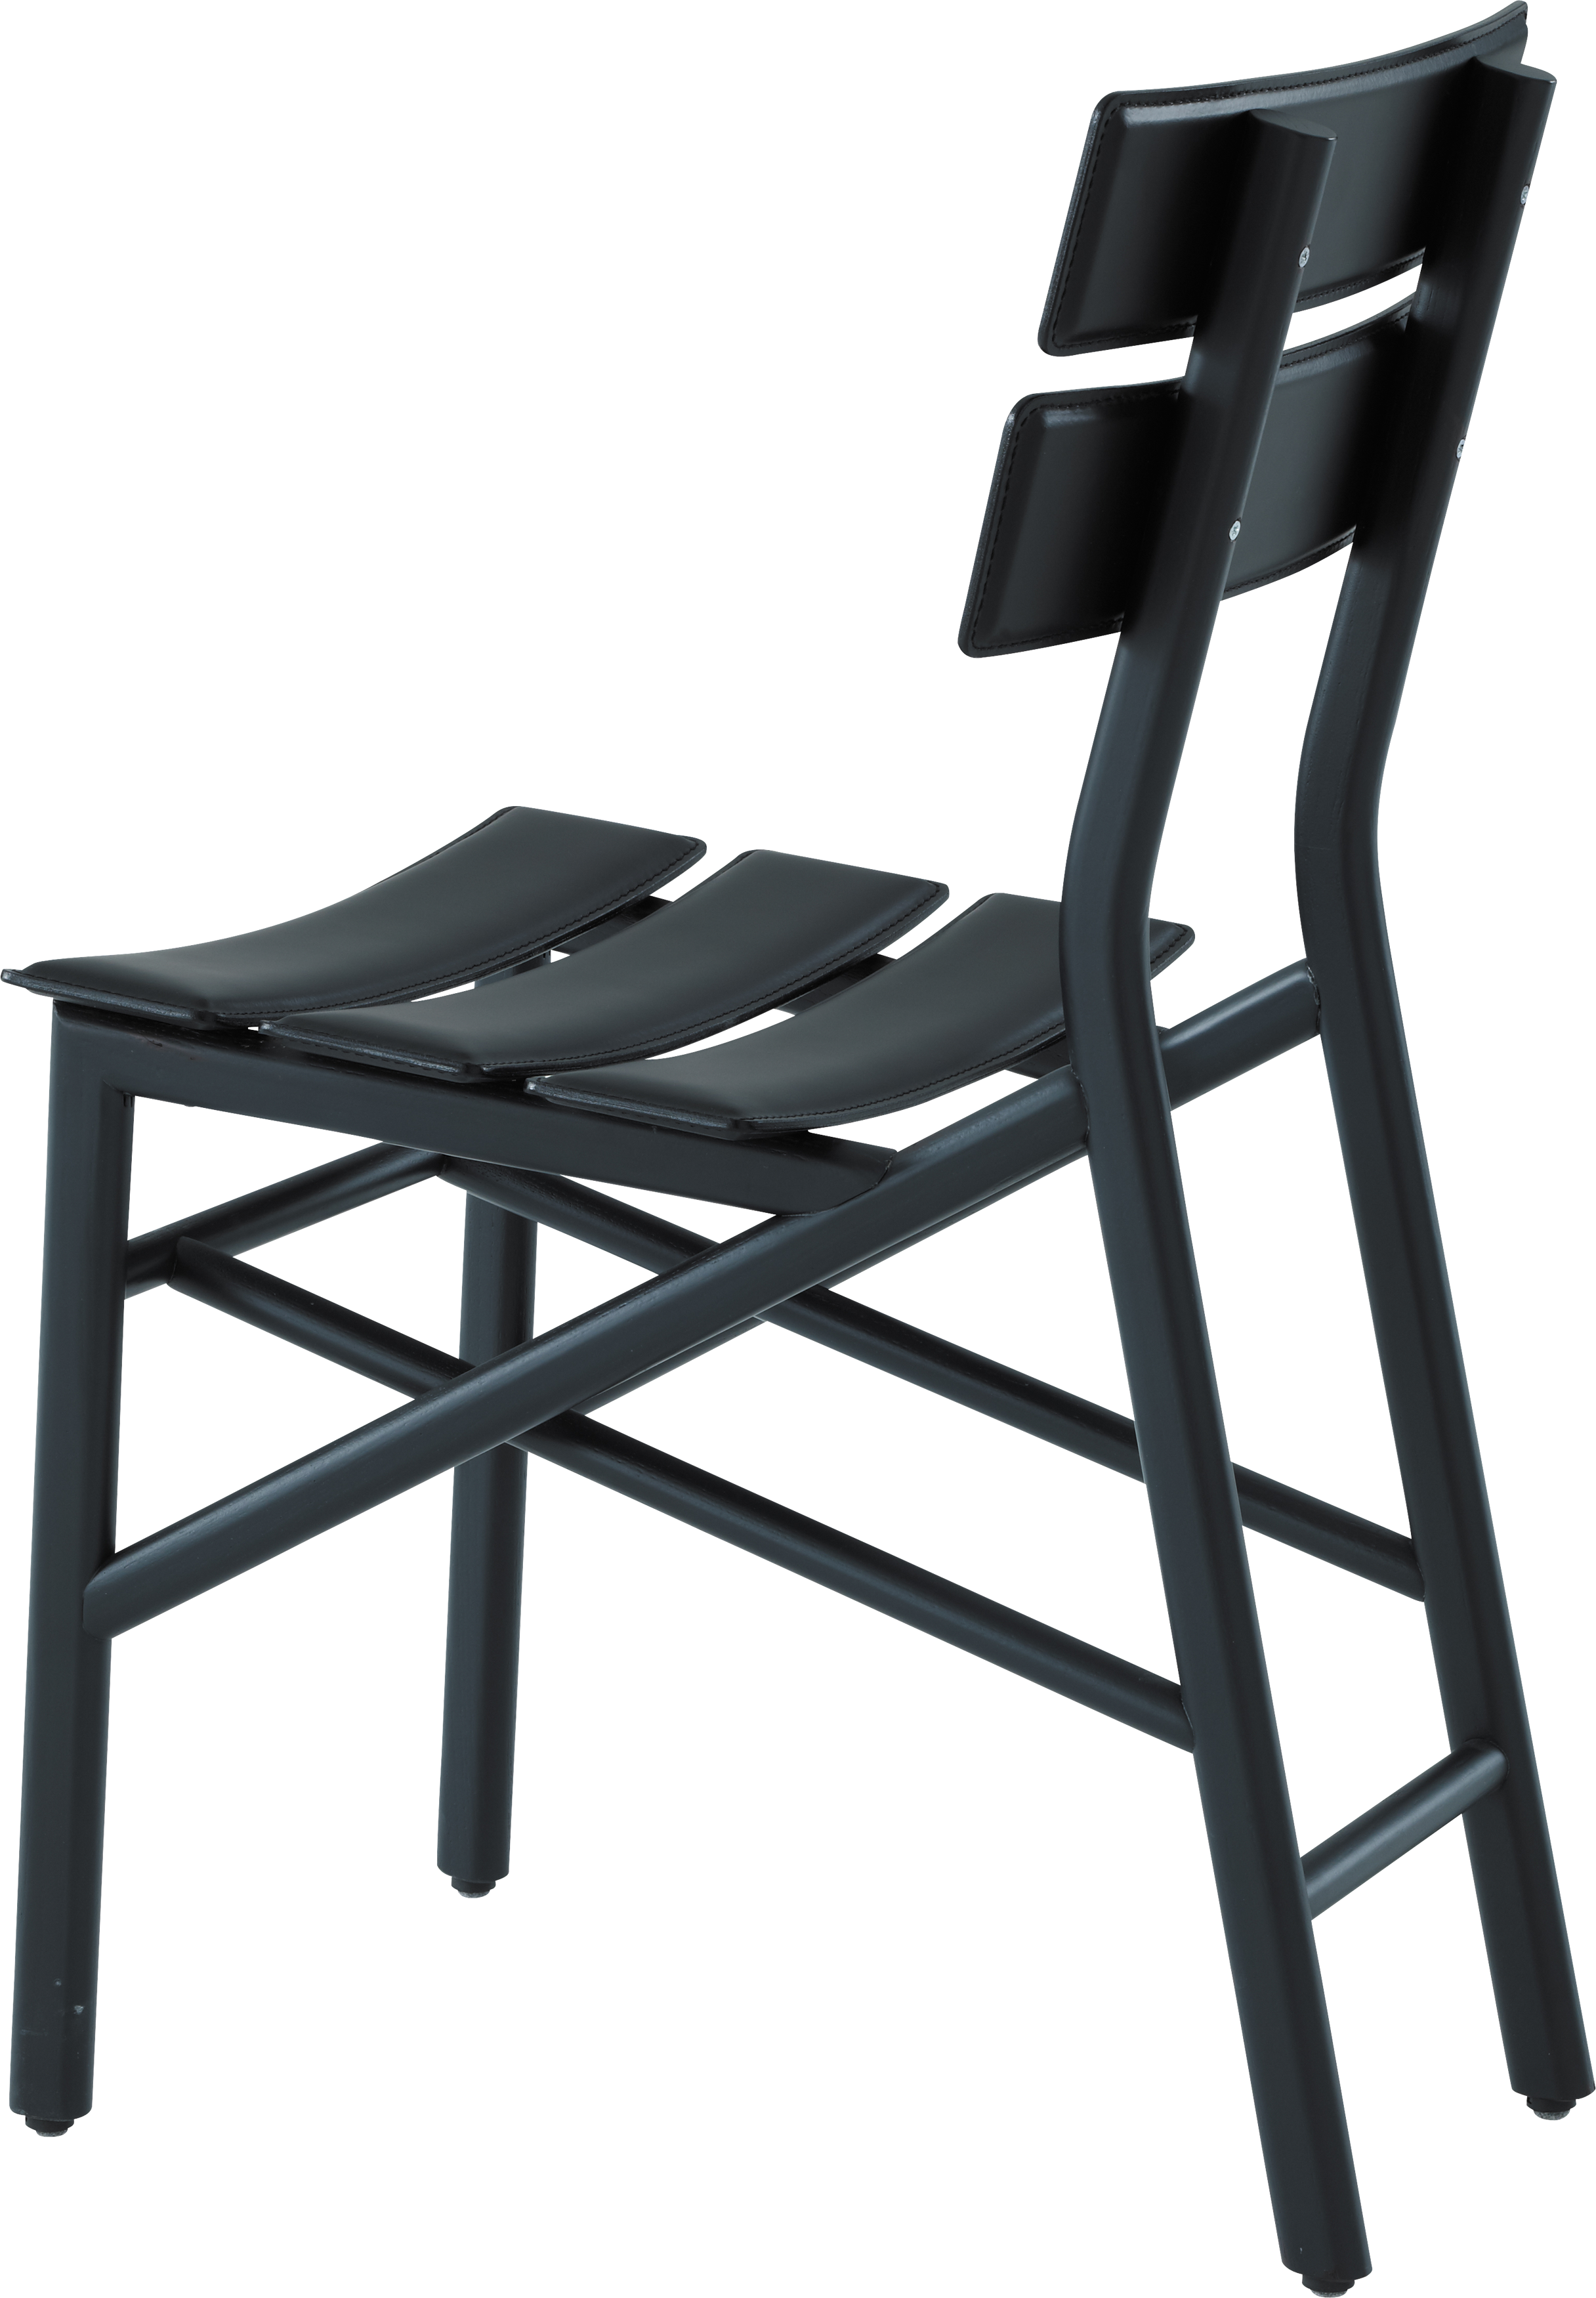 Chair PNG image transparent image download, size: 2432x3501px